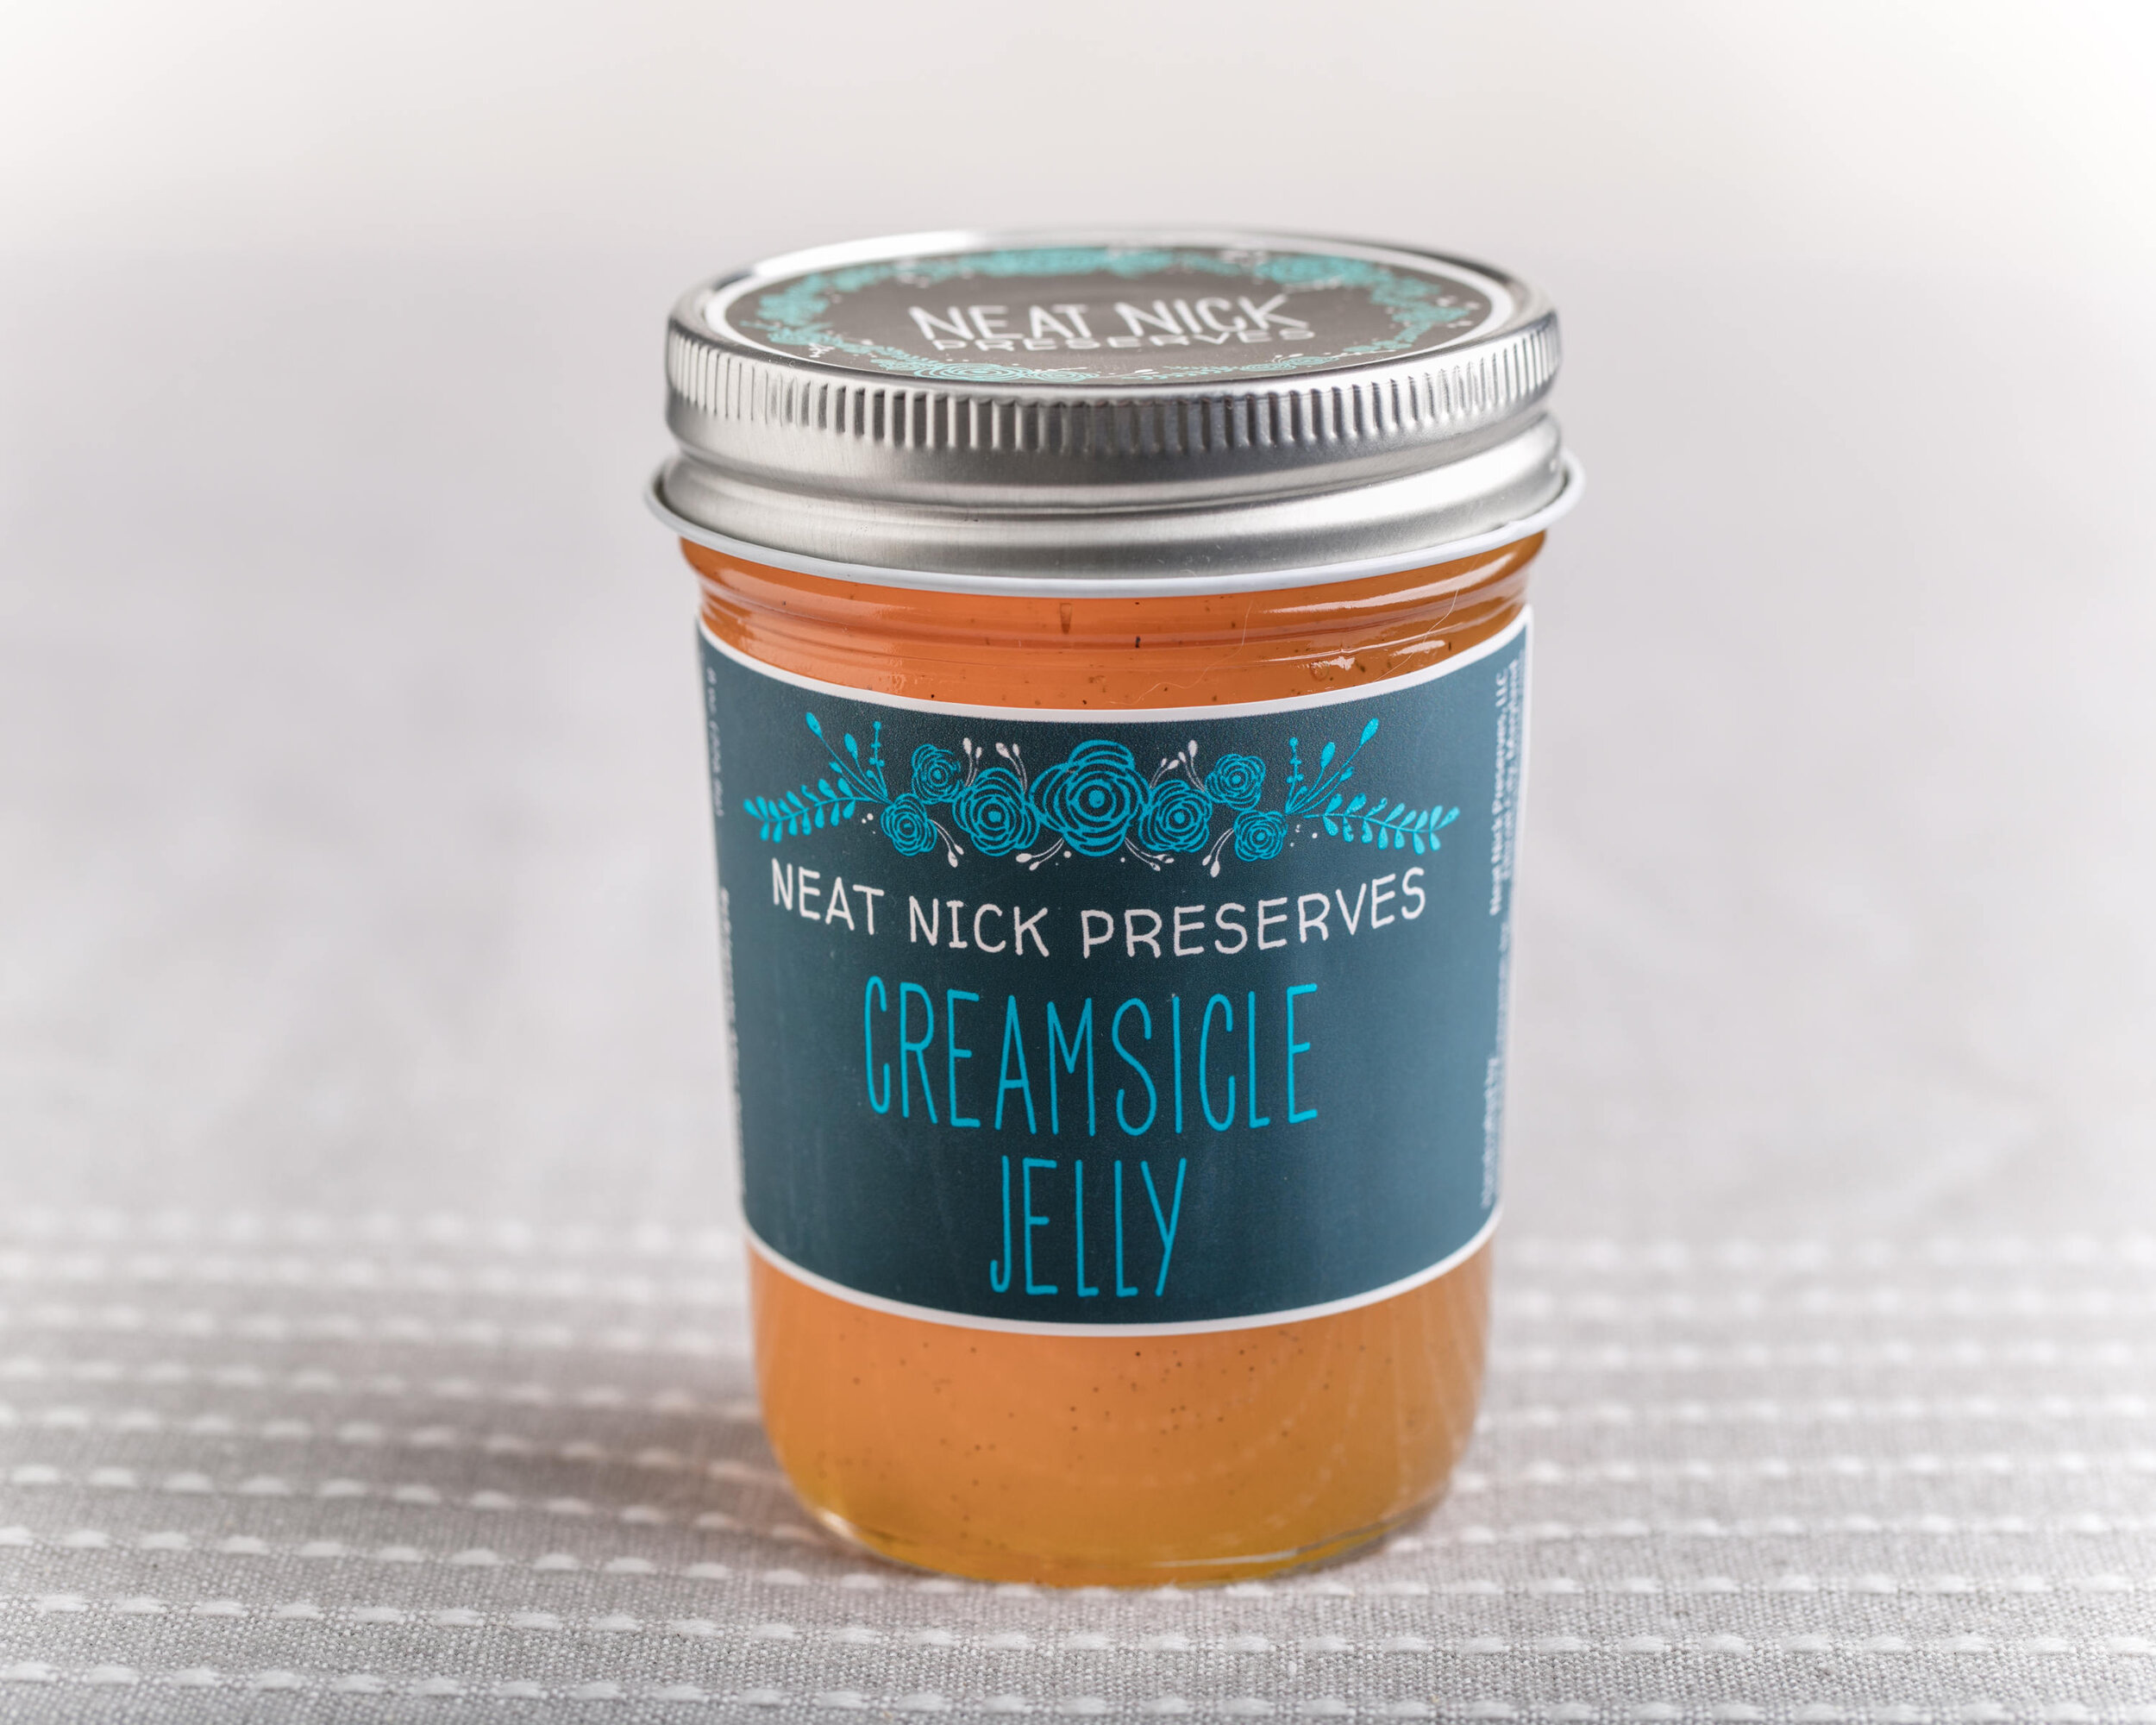 Creamsicle Jelly